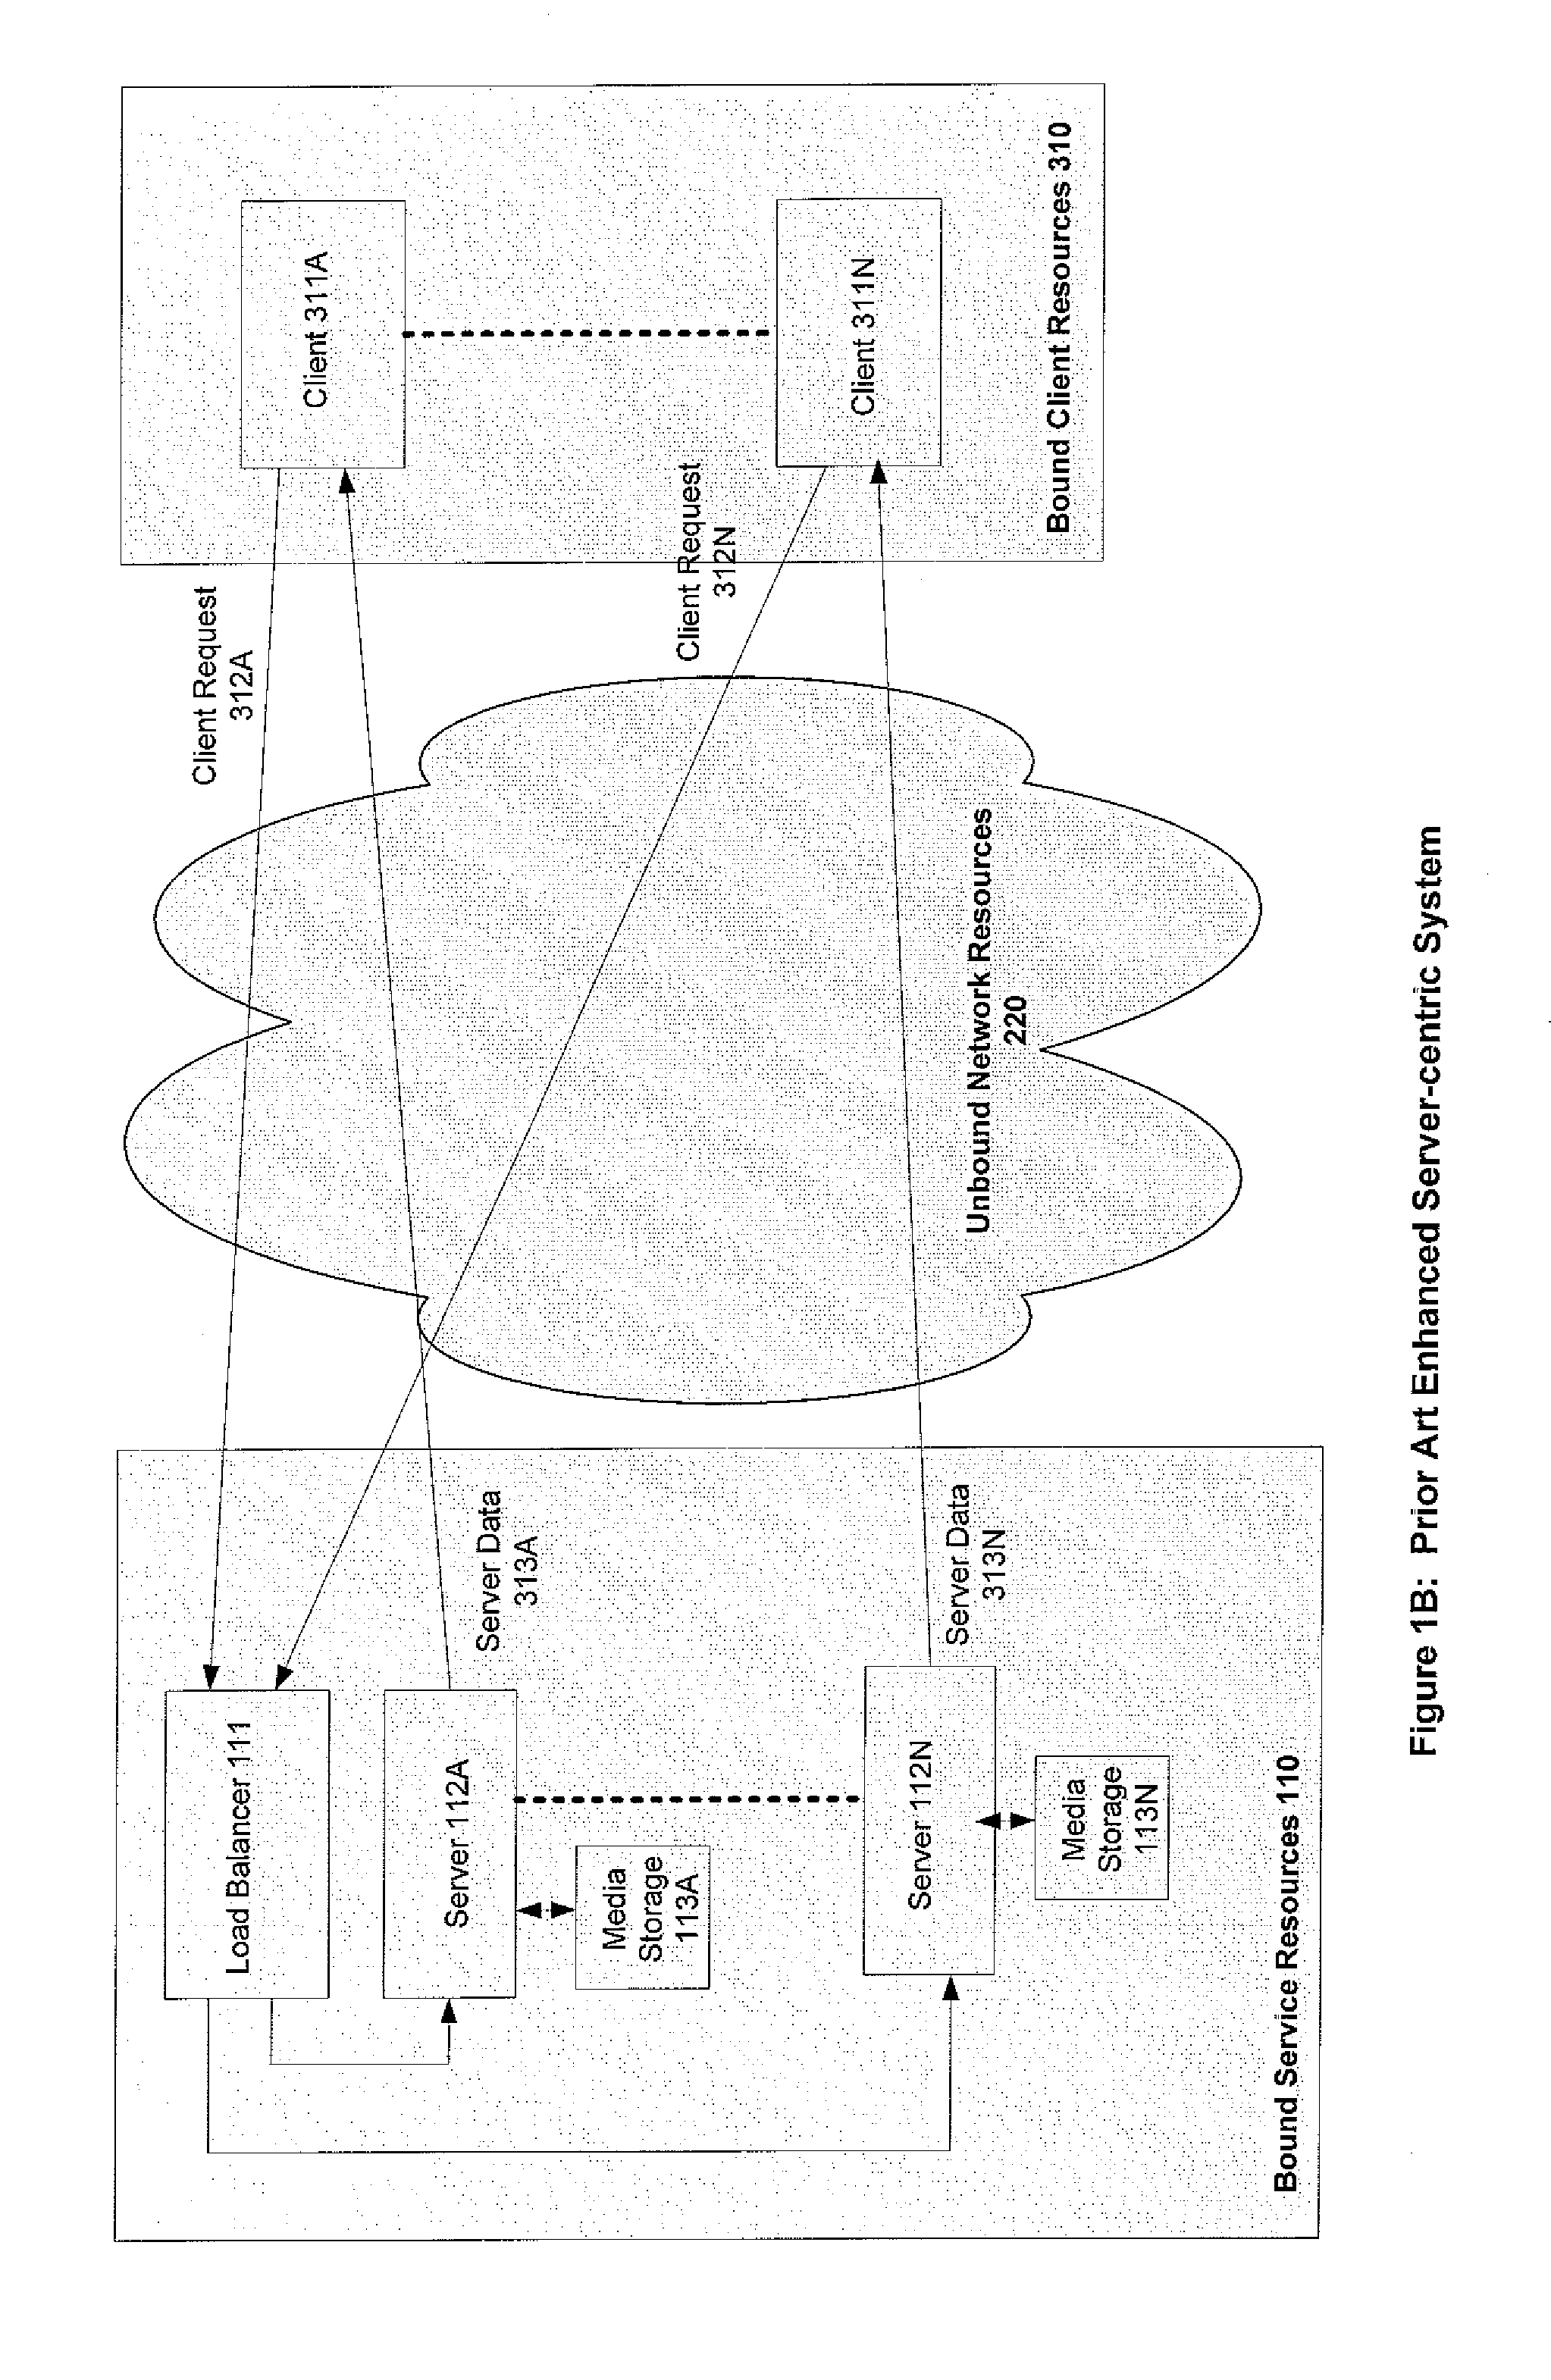 Systems and methods for multi-perspective optimization of data transfers in heterogeneous networks such as the internet